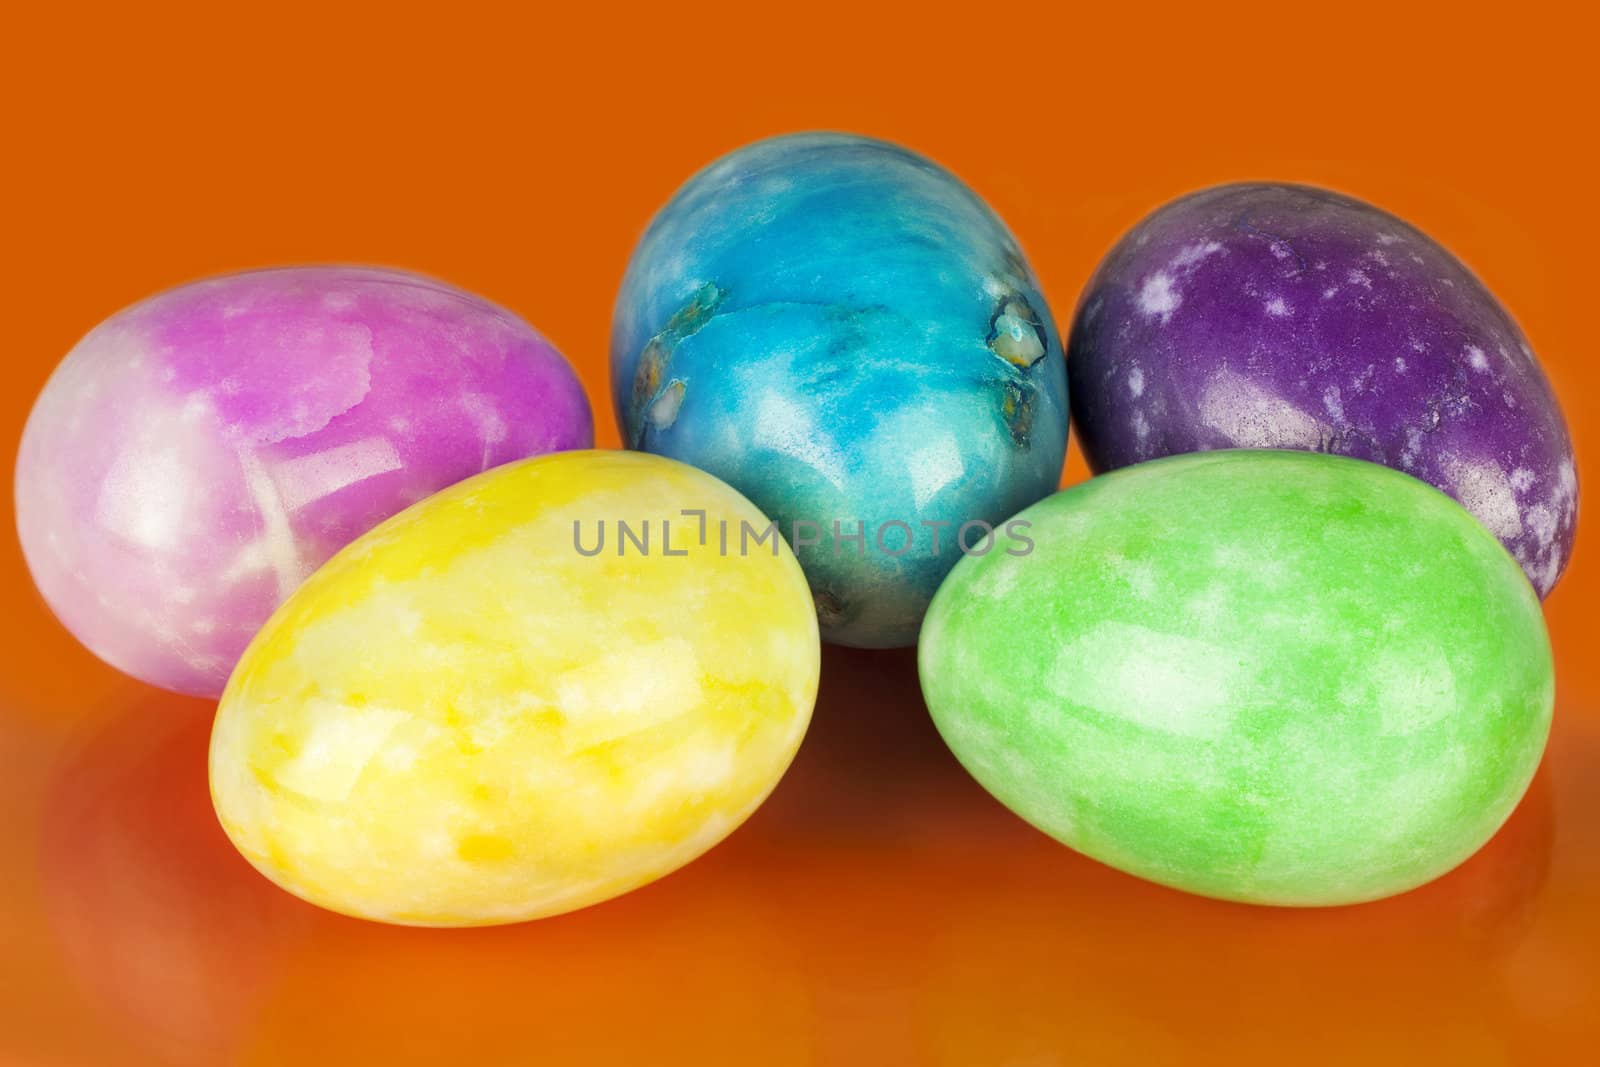 Easter eggs in different colors on an orange background